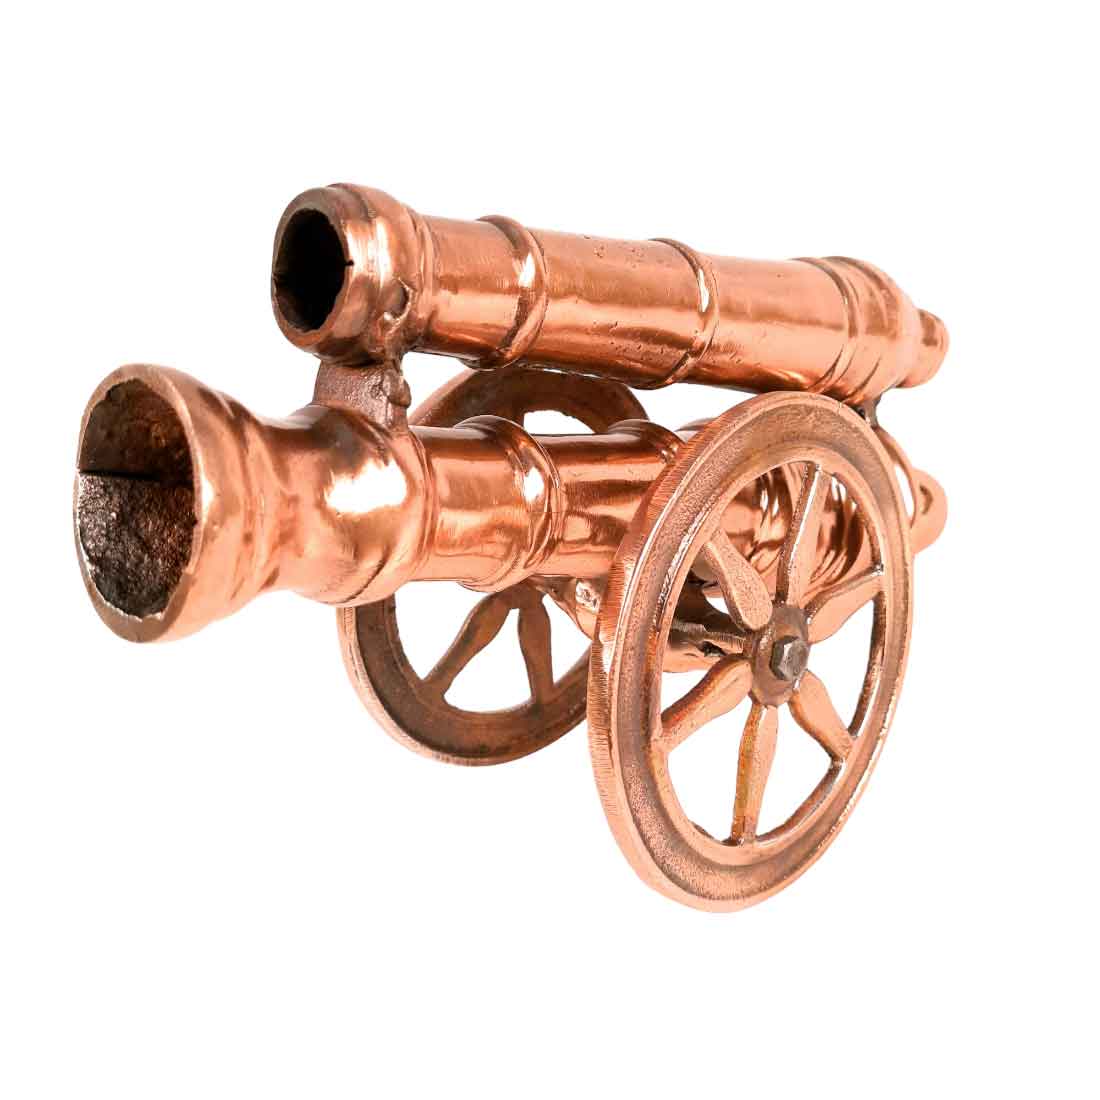 Cannon Double Barrel - Antique Showpiece - For Table Decor & Gifts -13 Inch